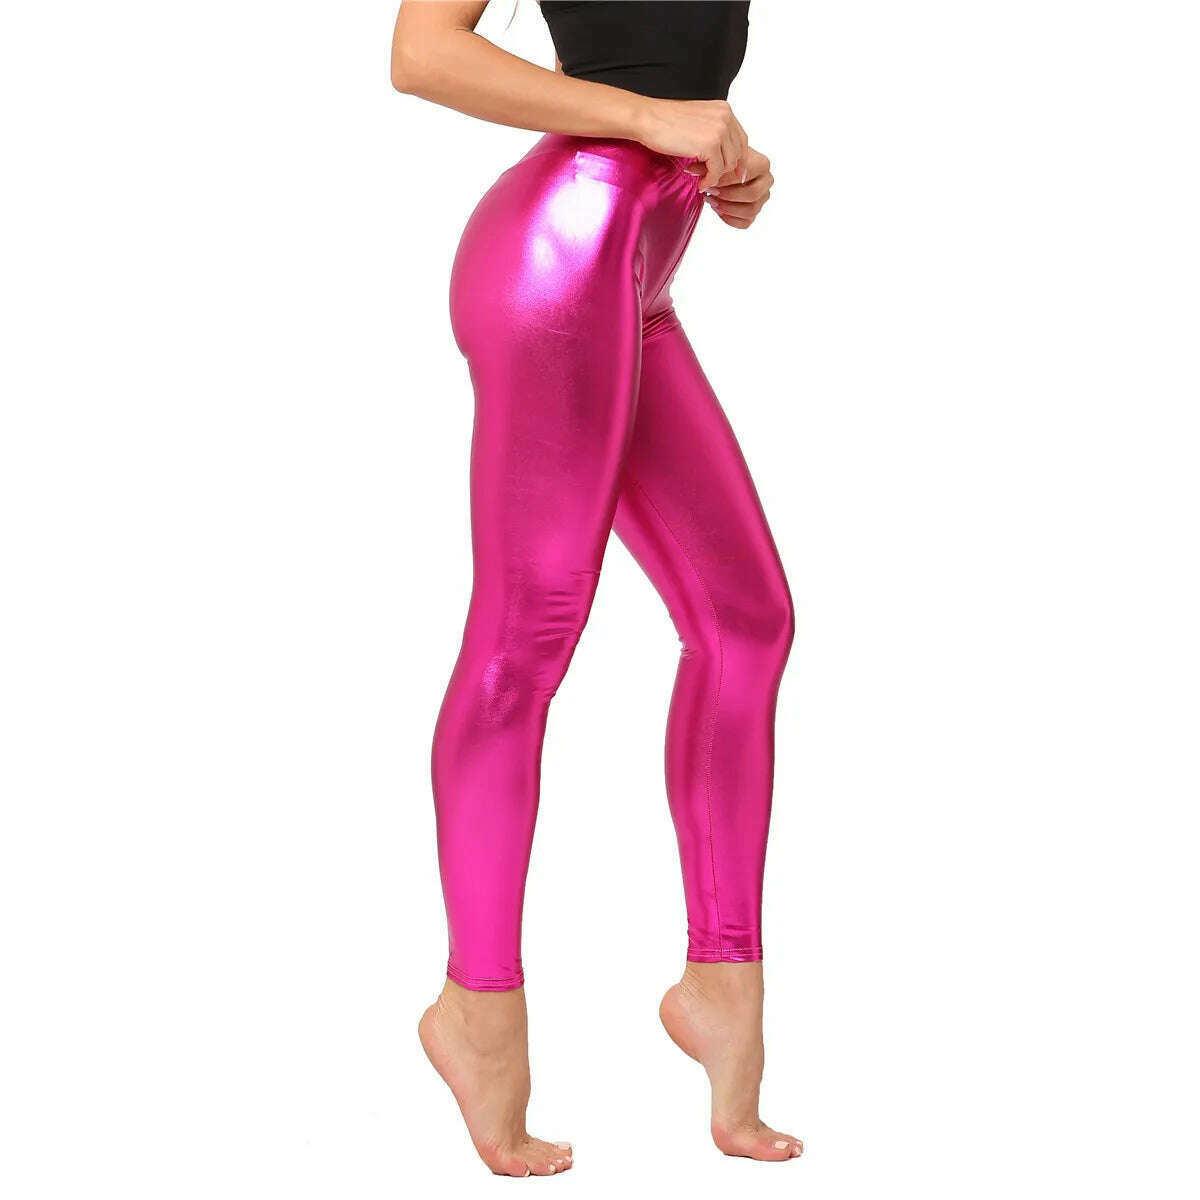 KIMLUD, Metallic Color PU Leggings Women Faux Leather Pants Dancing Party Pant Sexy Night Club Skinny Costume Pants Tight Trousers, KIMLUD Womens Clothes